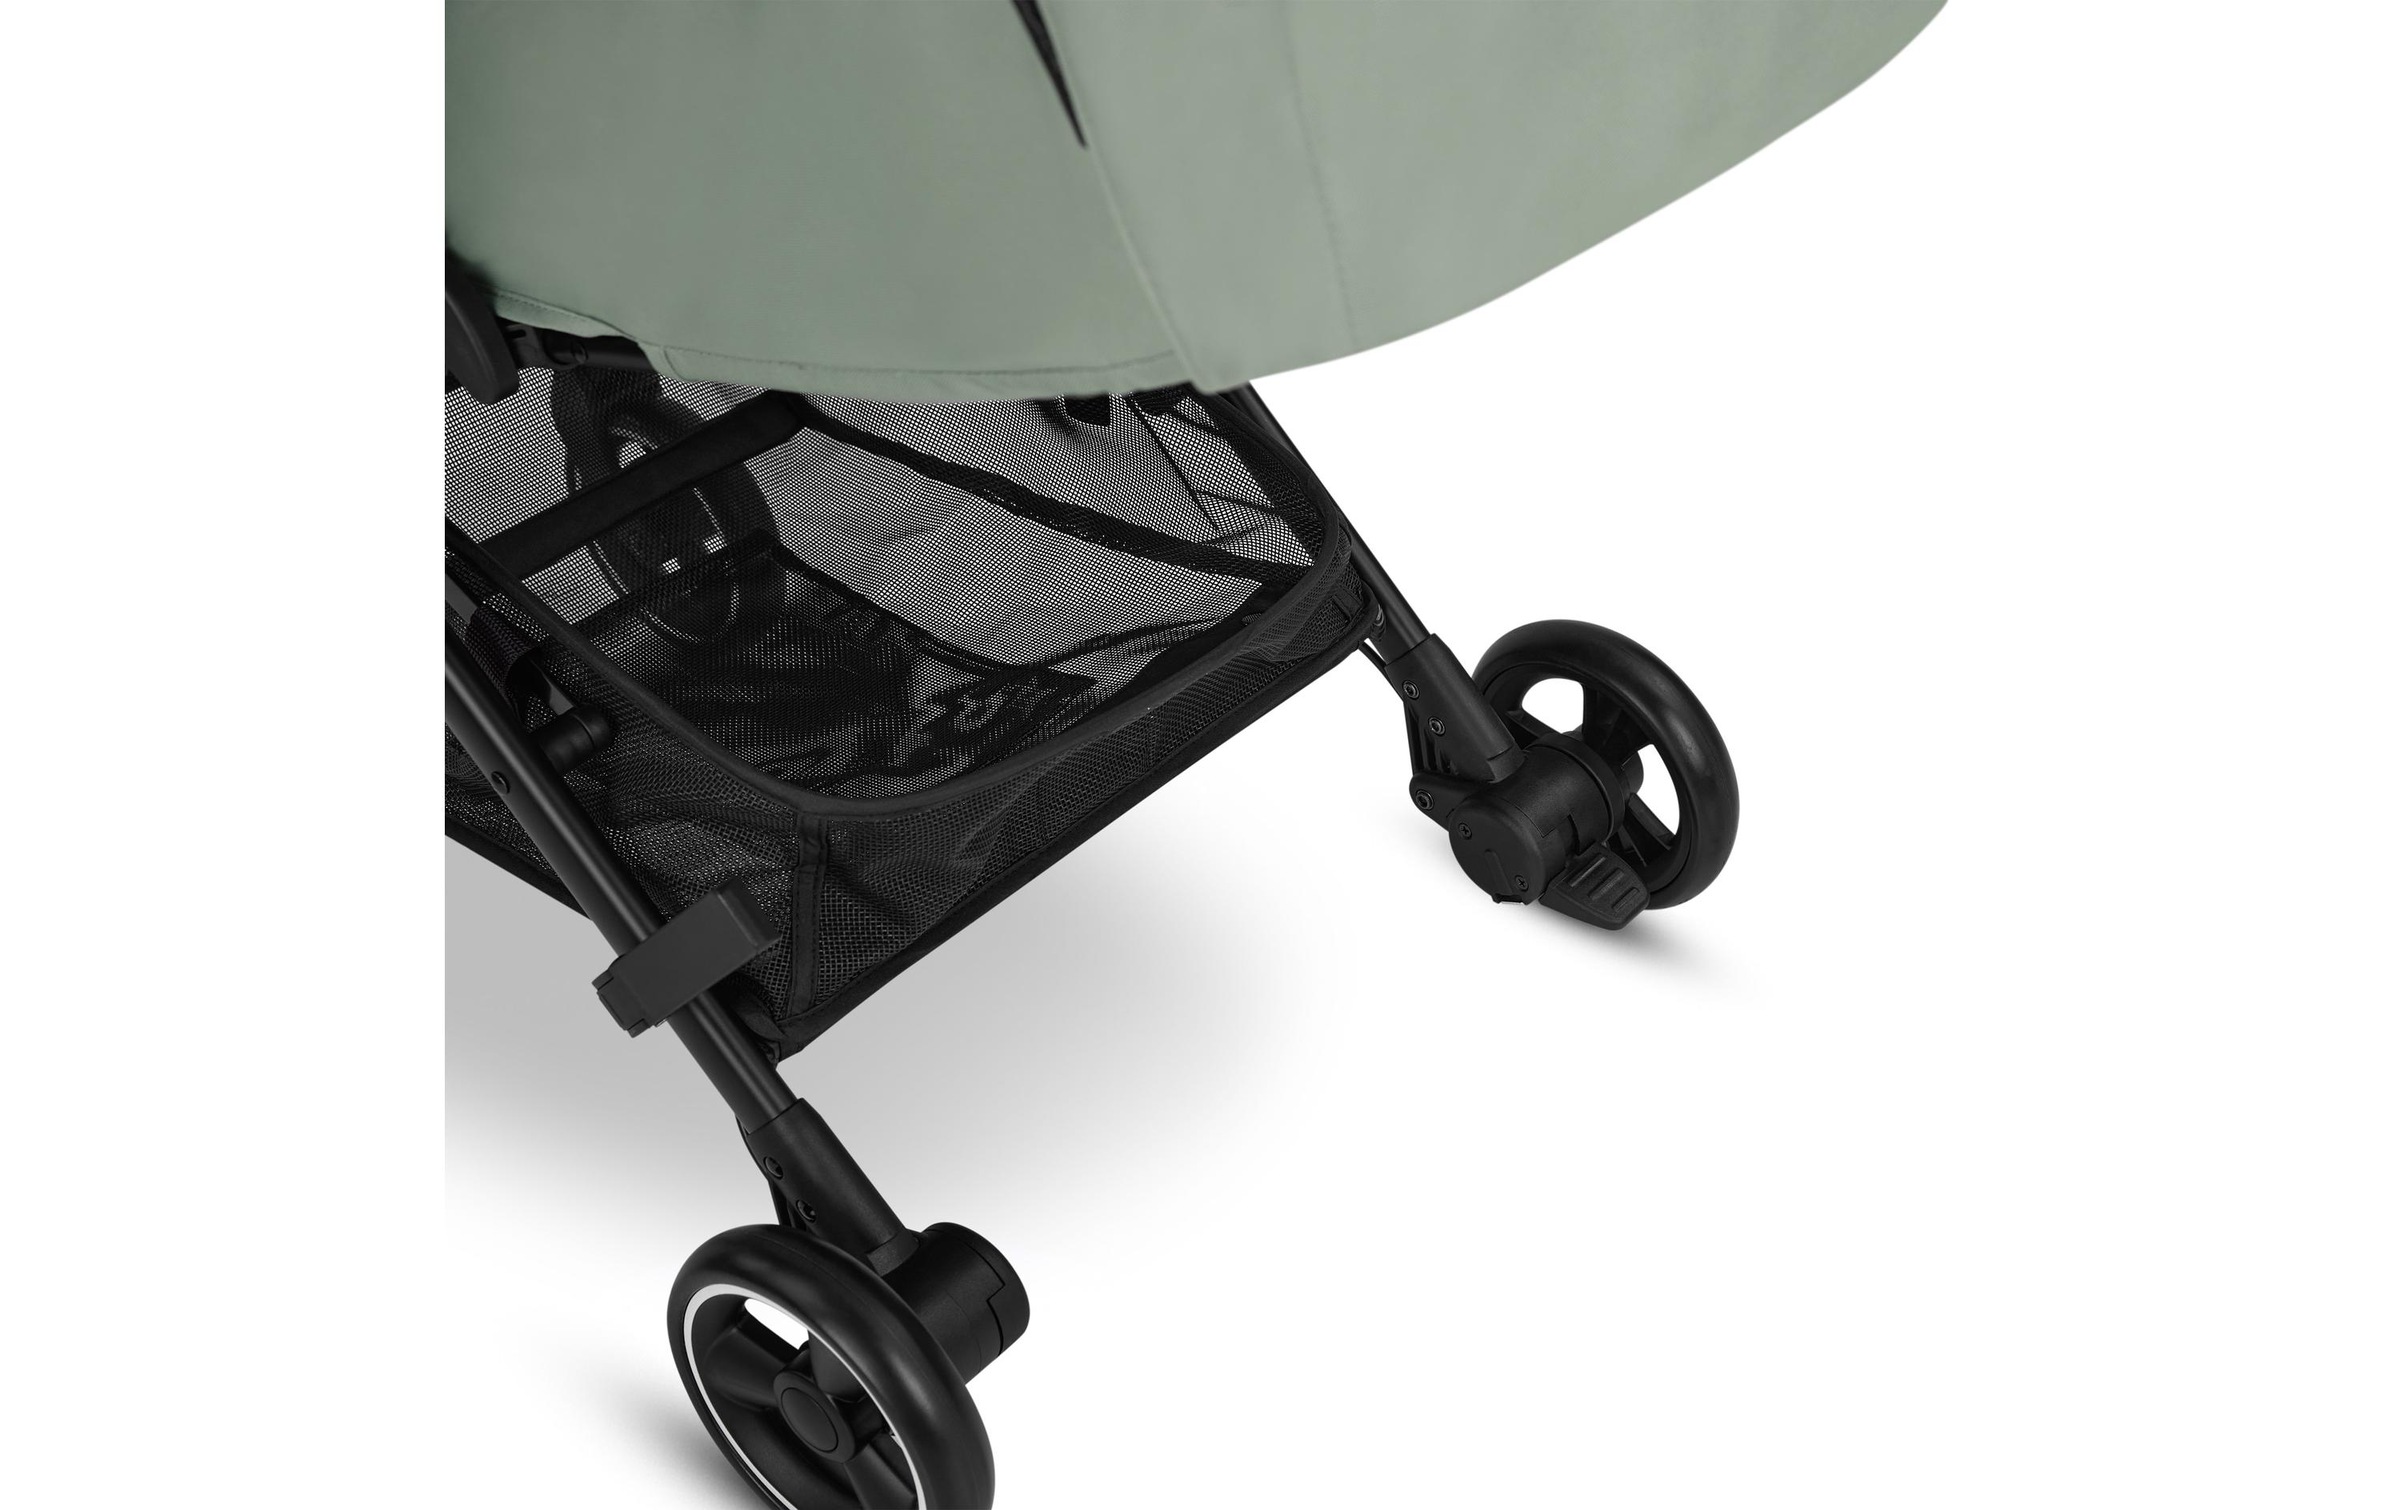 ABC Design Kinder-Buggy »Ping Two Mint«, 27 kg